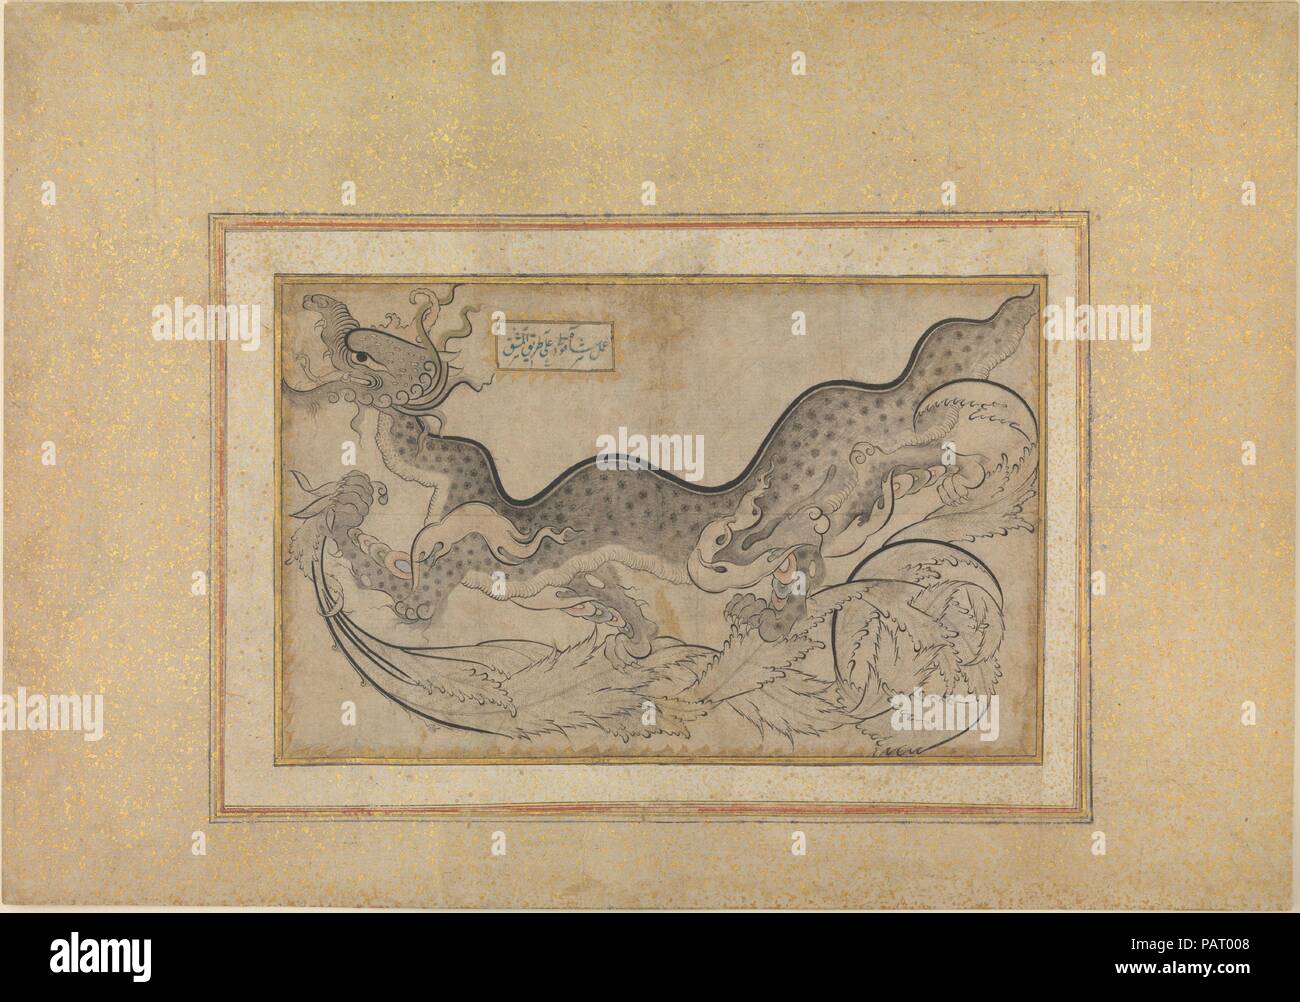 'Saz'-style Drawing of a Dragon amid Foliage. Artist: Shah Quli (Turkish, born Tabriz, Iran, active ca. mid-16th century). Dimensions: Painting: H. 6 13/16 in. (17.3 cm)  W. 10 11/16in. (27.2cm)  Mat: H. 16 in. (40.6 cm)   W. 22 in. (55.9 cm)  Frame : H. 17 in. (43.2 cm)  W. 23 in. (58.4 cm). Date: ca. 1540-50.  The mid-sixteenth century saw the flourishing of the so-called saz style--characterized by the depiction of stylized, serrated leaf foliage, often paired with fantastic creatures including dragons and phoenixes. This imagery appears on Ottoman art in a variety of media, including texti Stock Photo